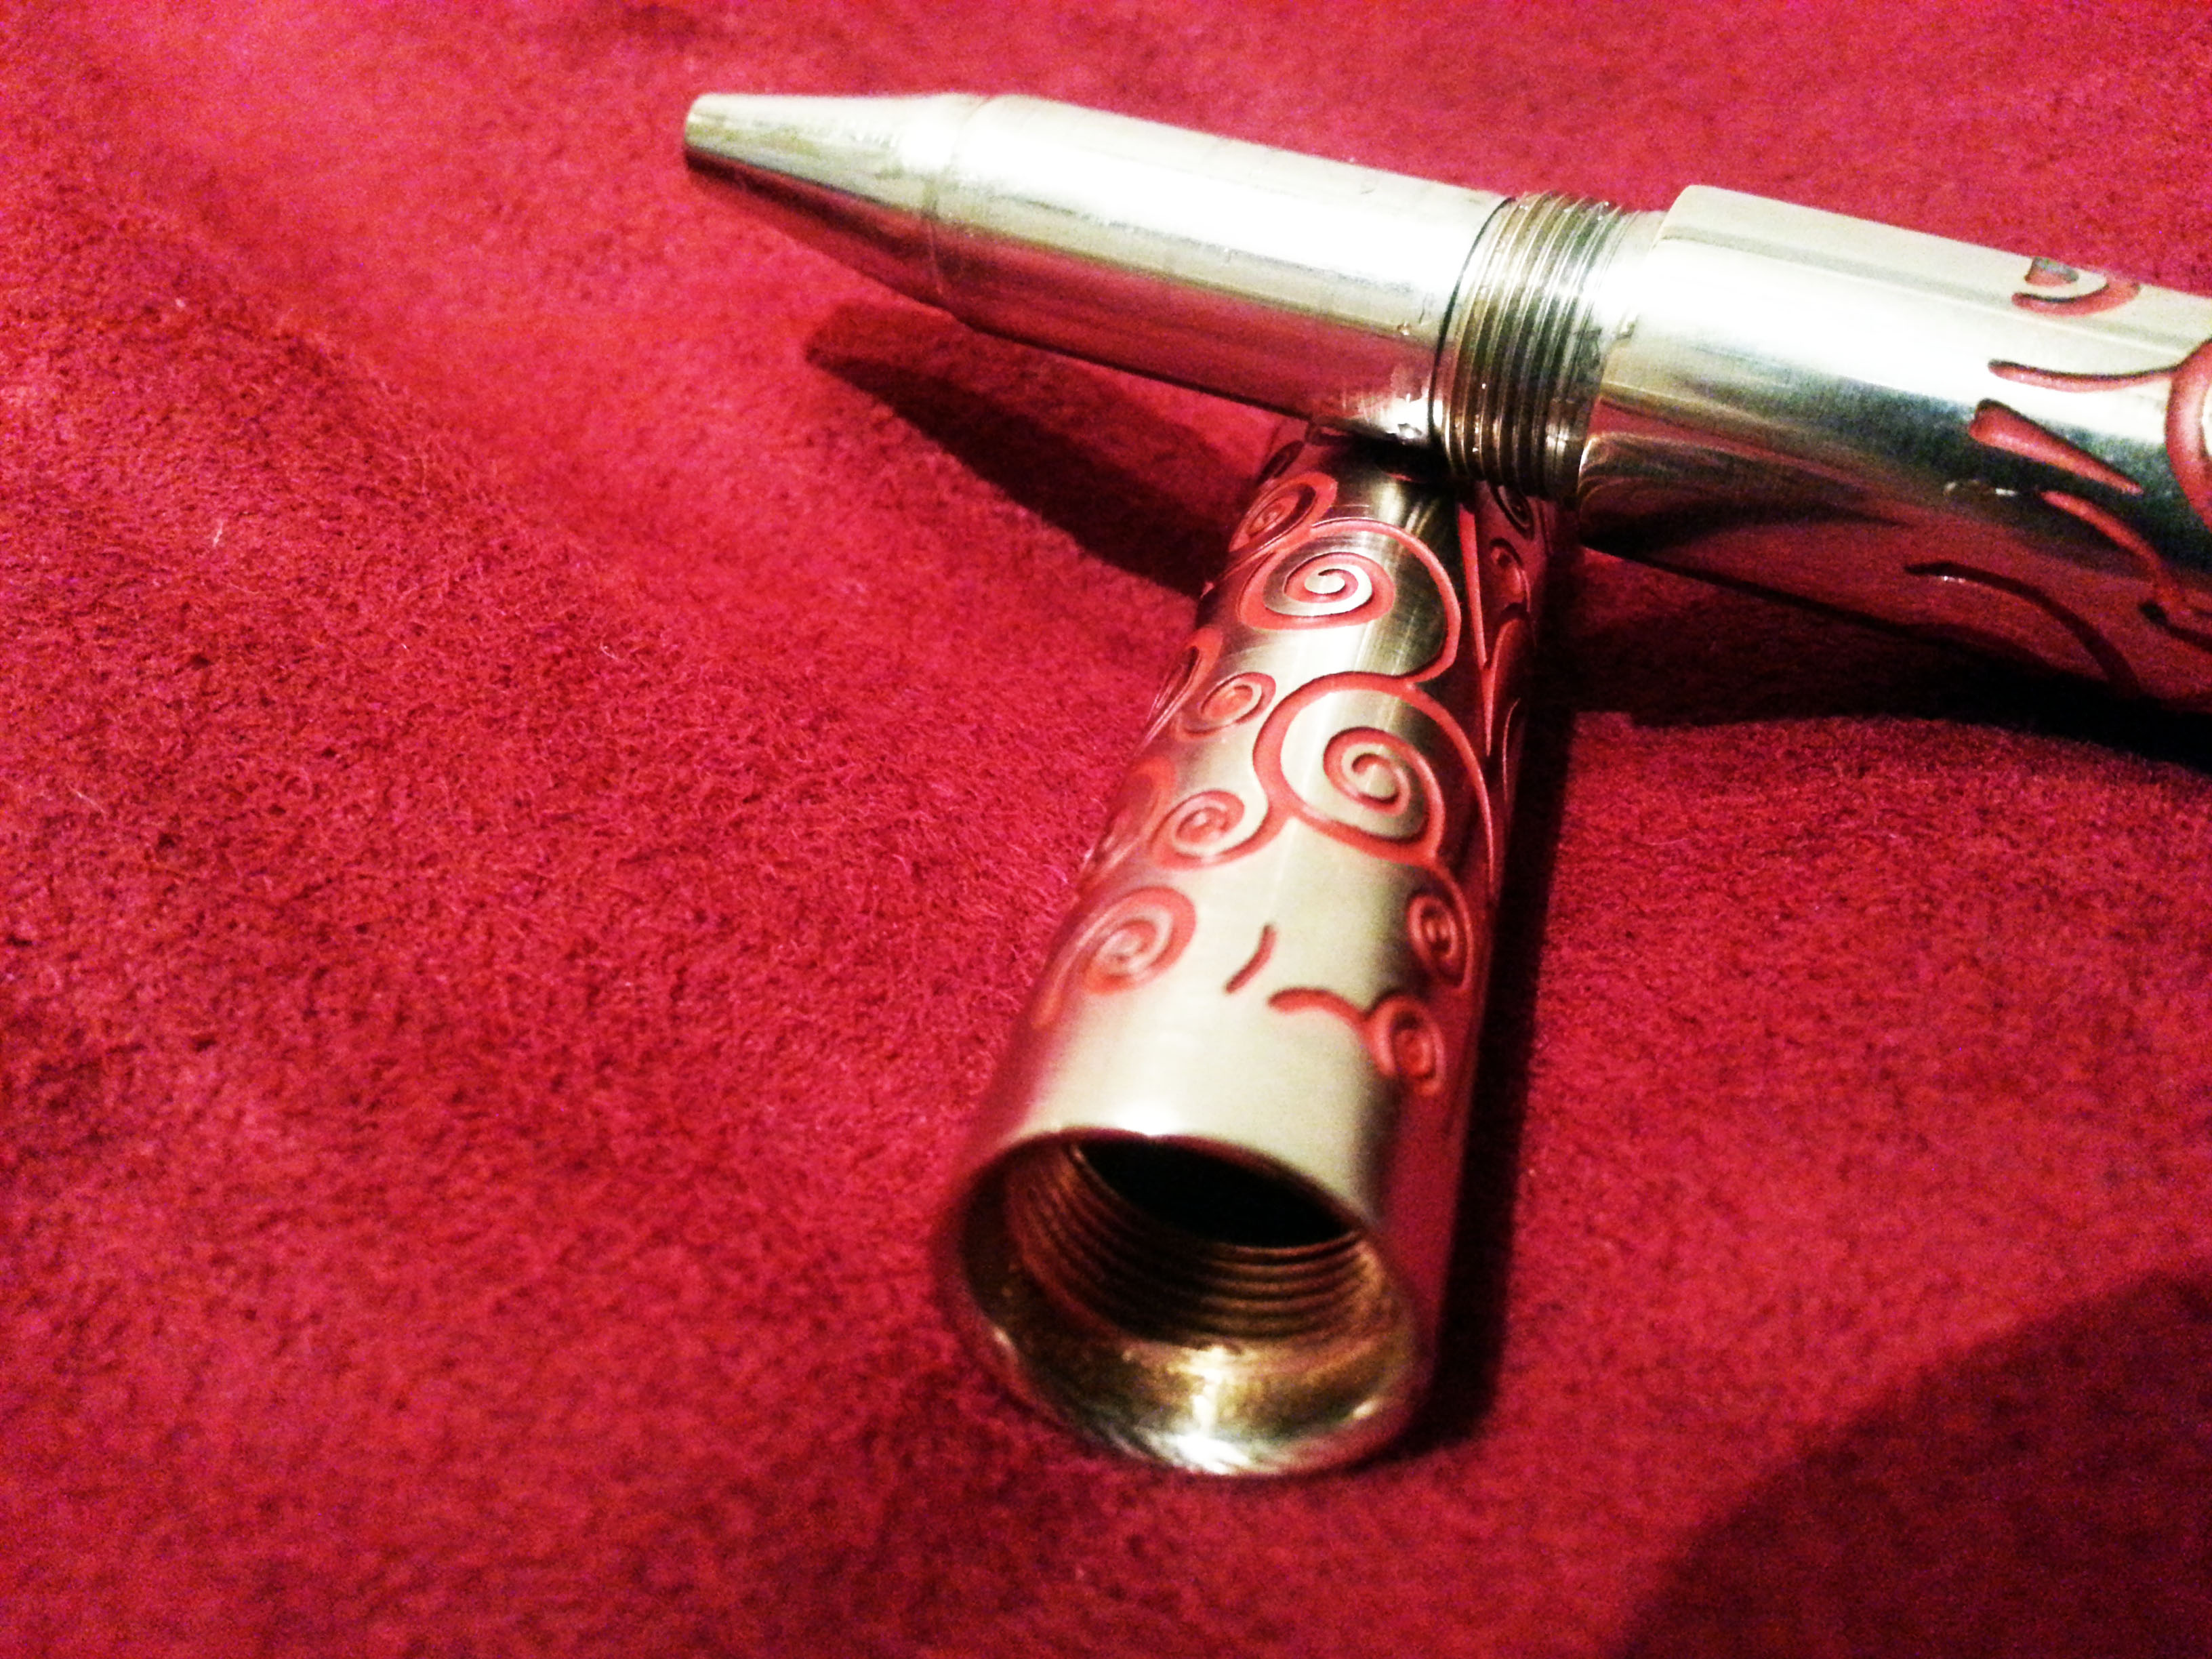 Chrome plated from head to toe, luxurious deep red swirls etched throughout.